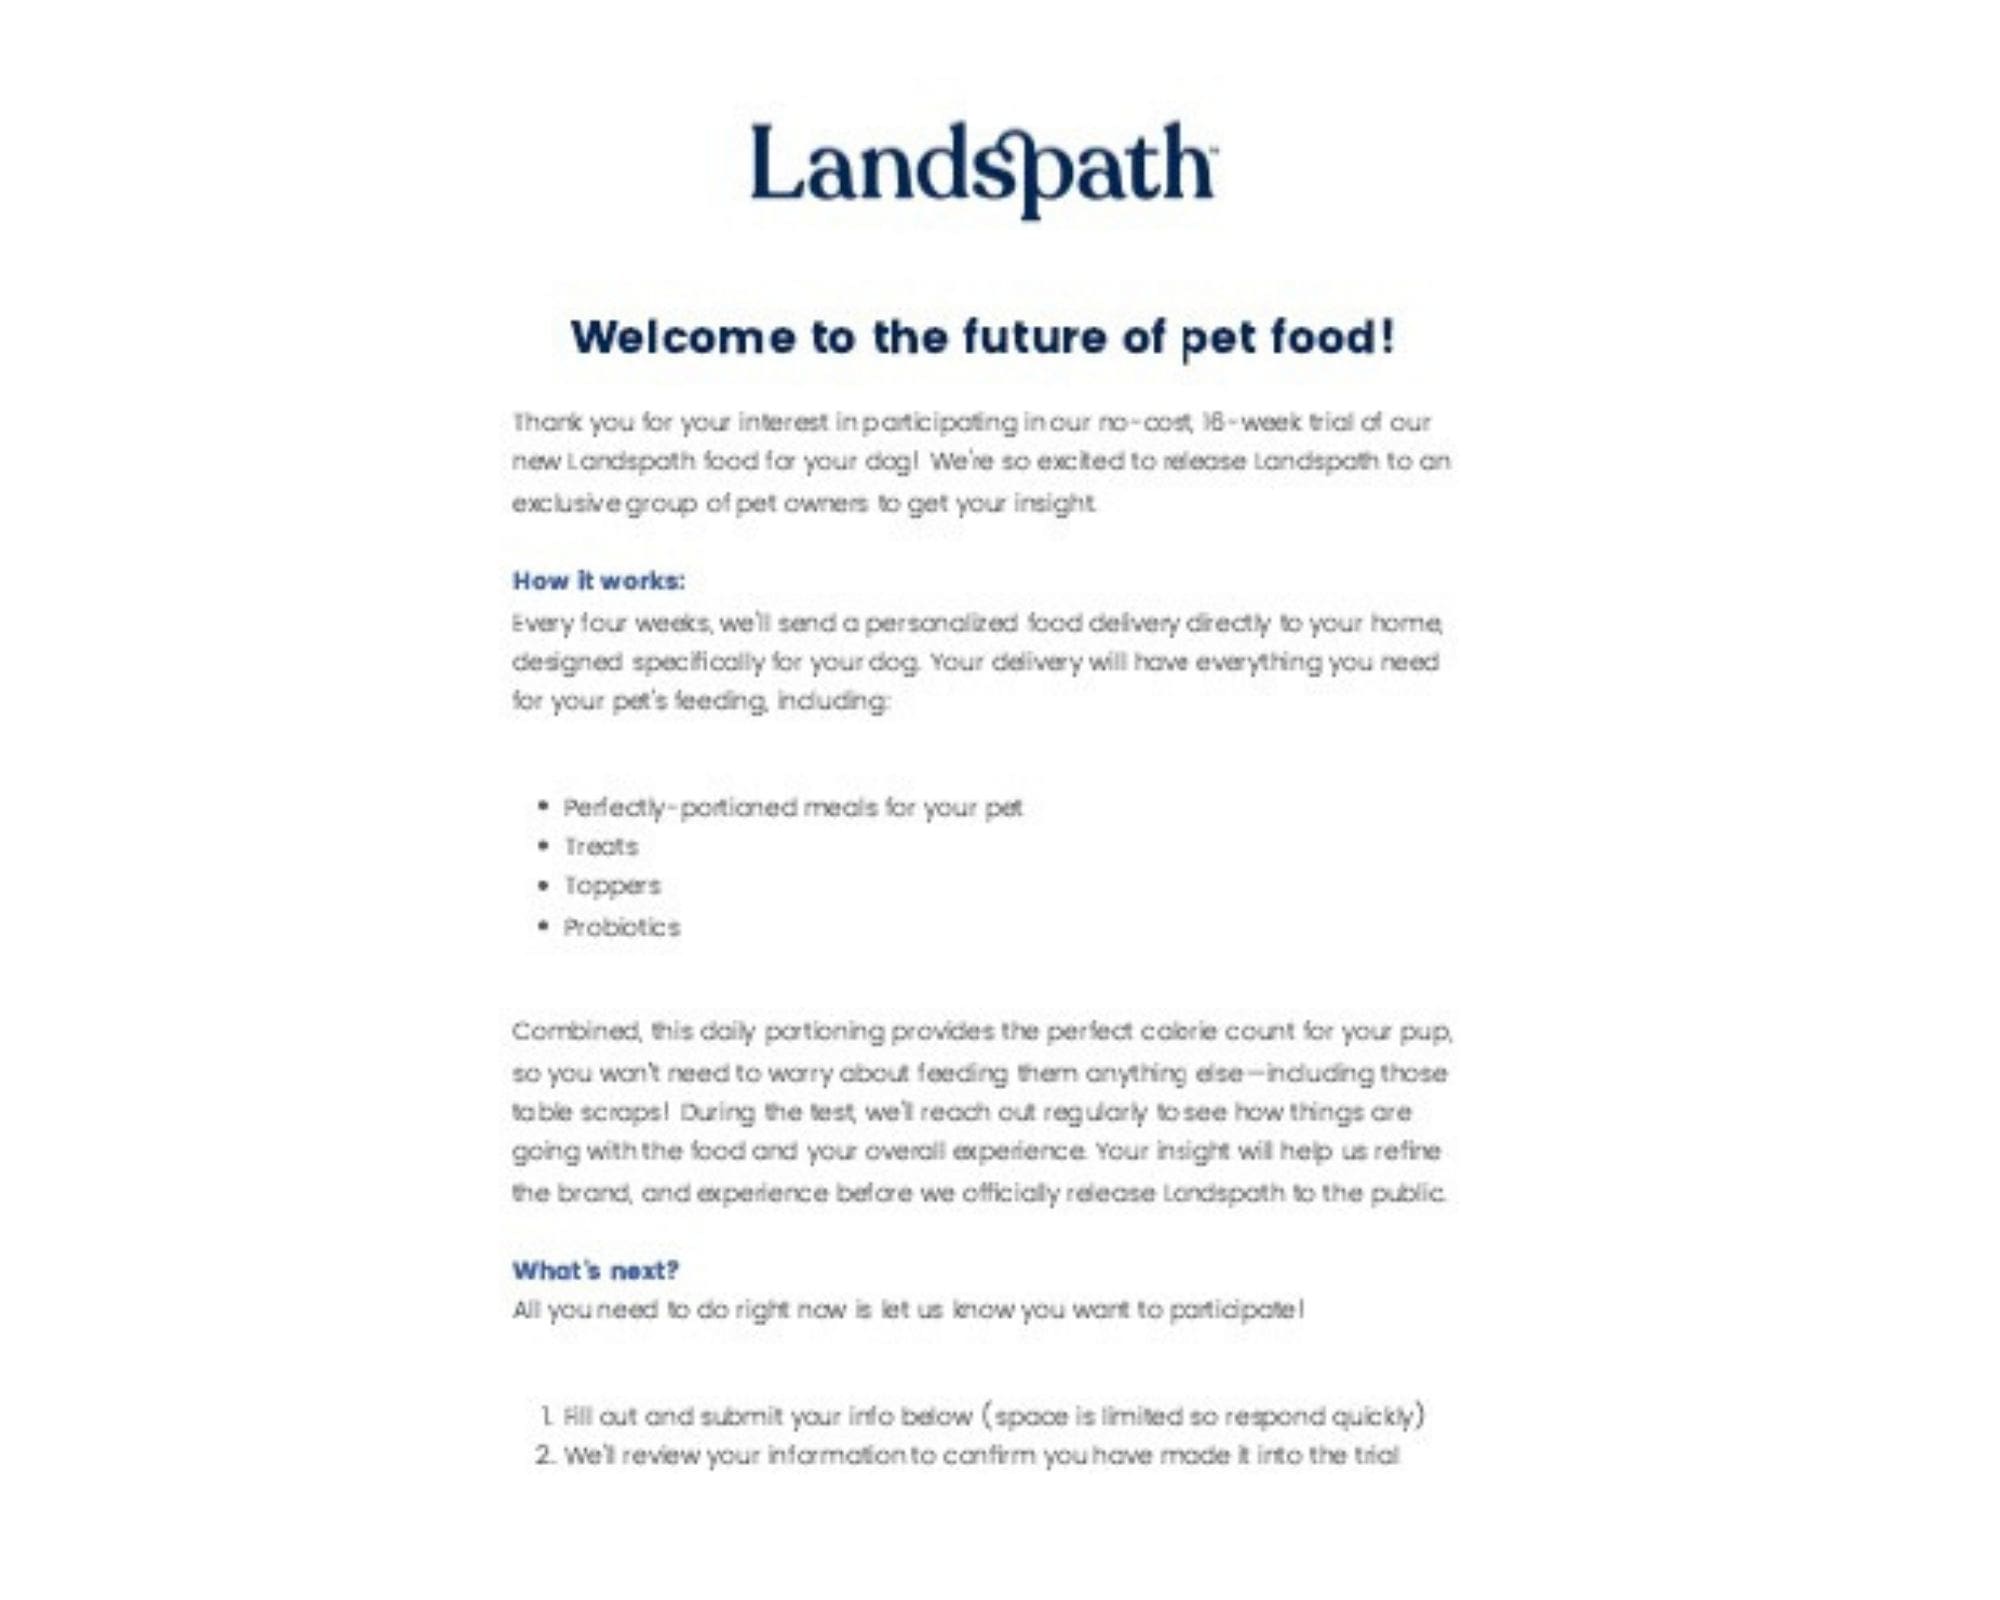 Will Landspath be the pet food industry's Trupanion?